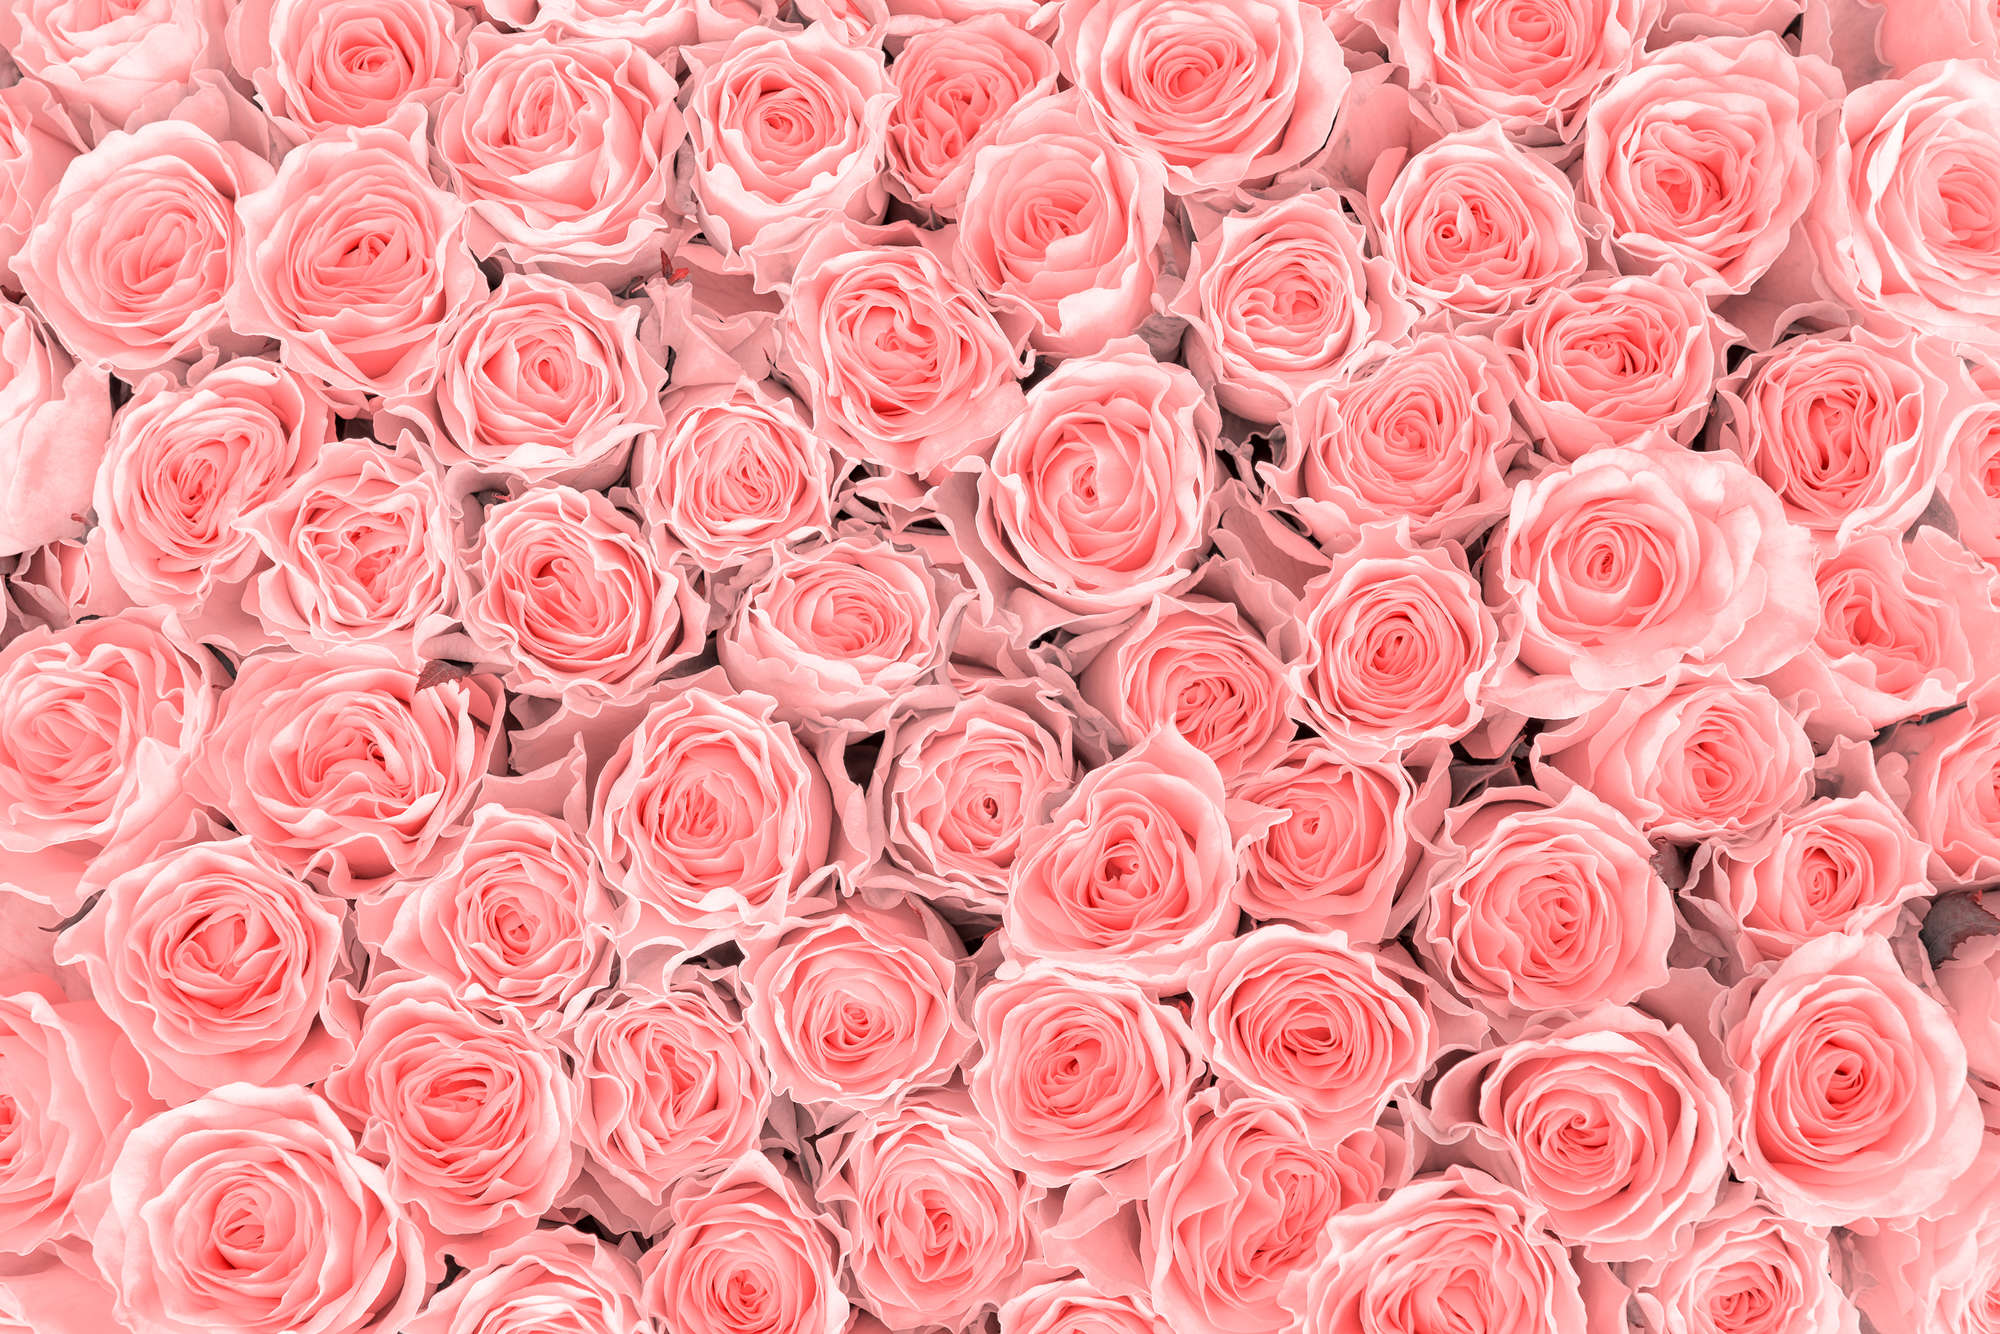             Plants mural pink roses on textured nonwoven
        